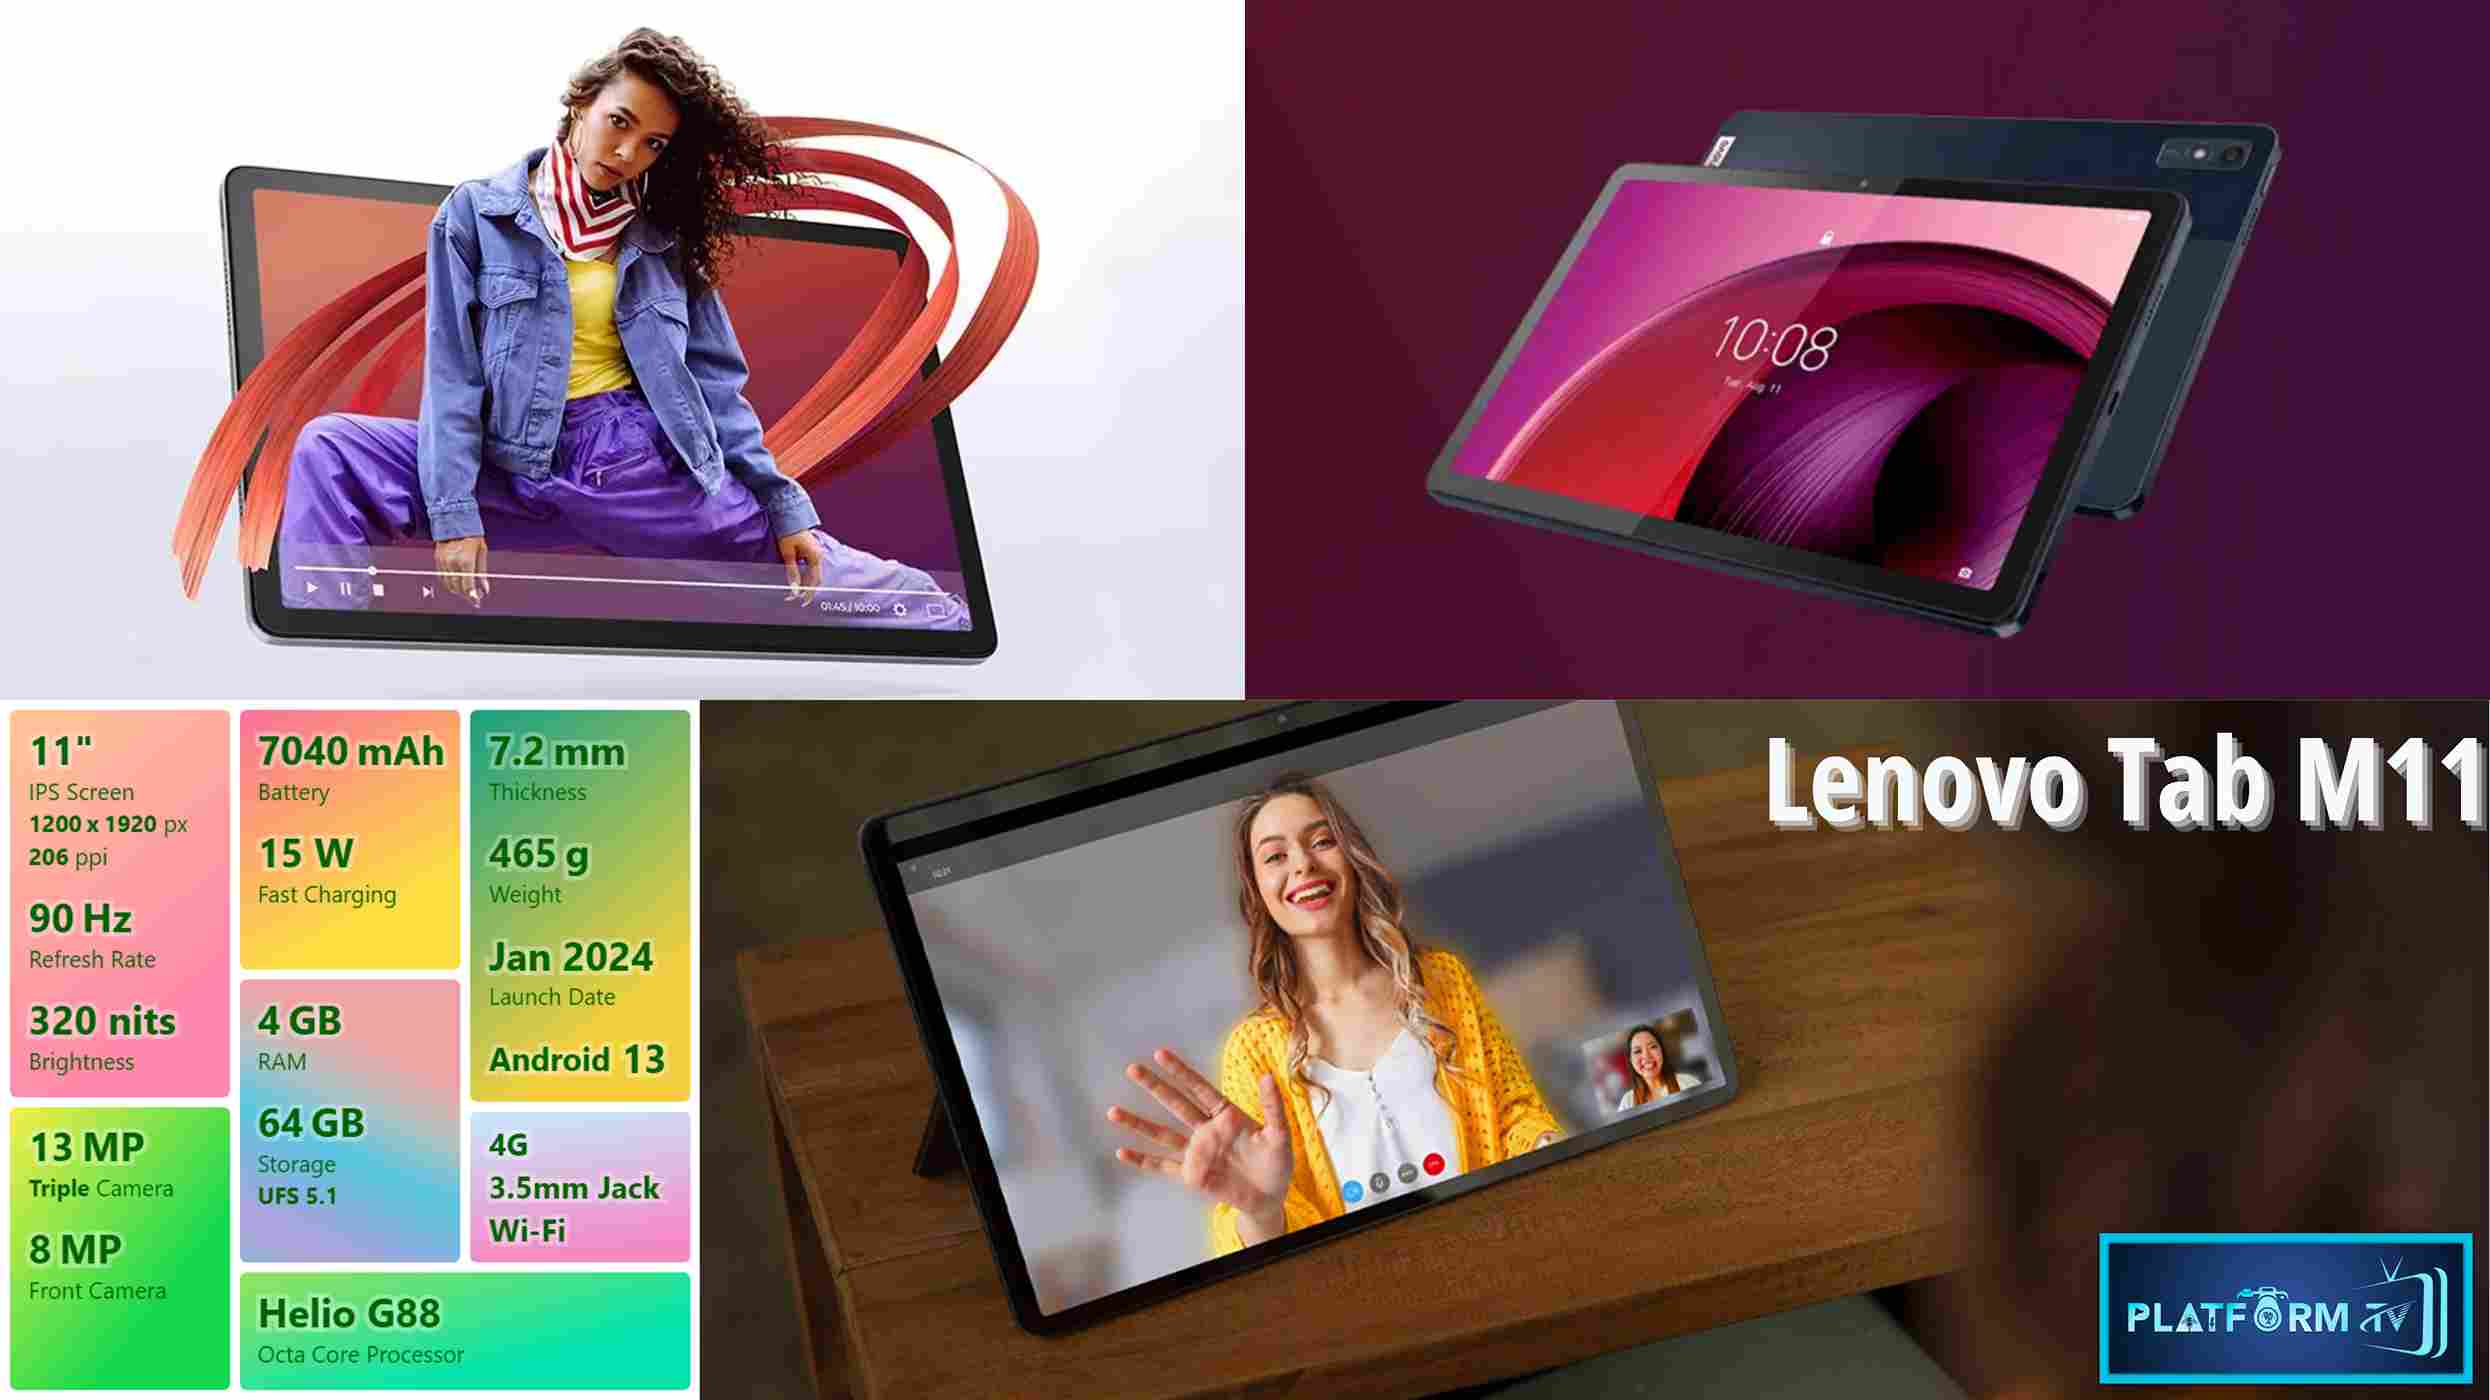 Lenovo Tab M11 Tablet Model Launched in India - Platform Tamil